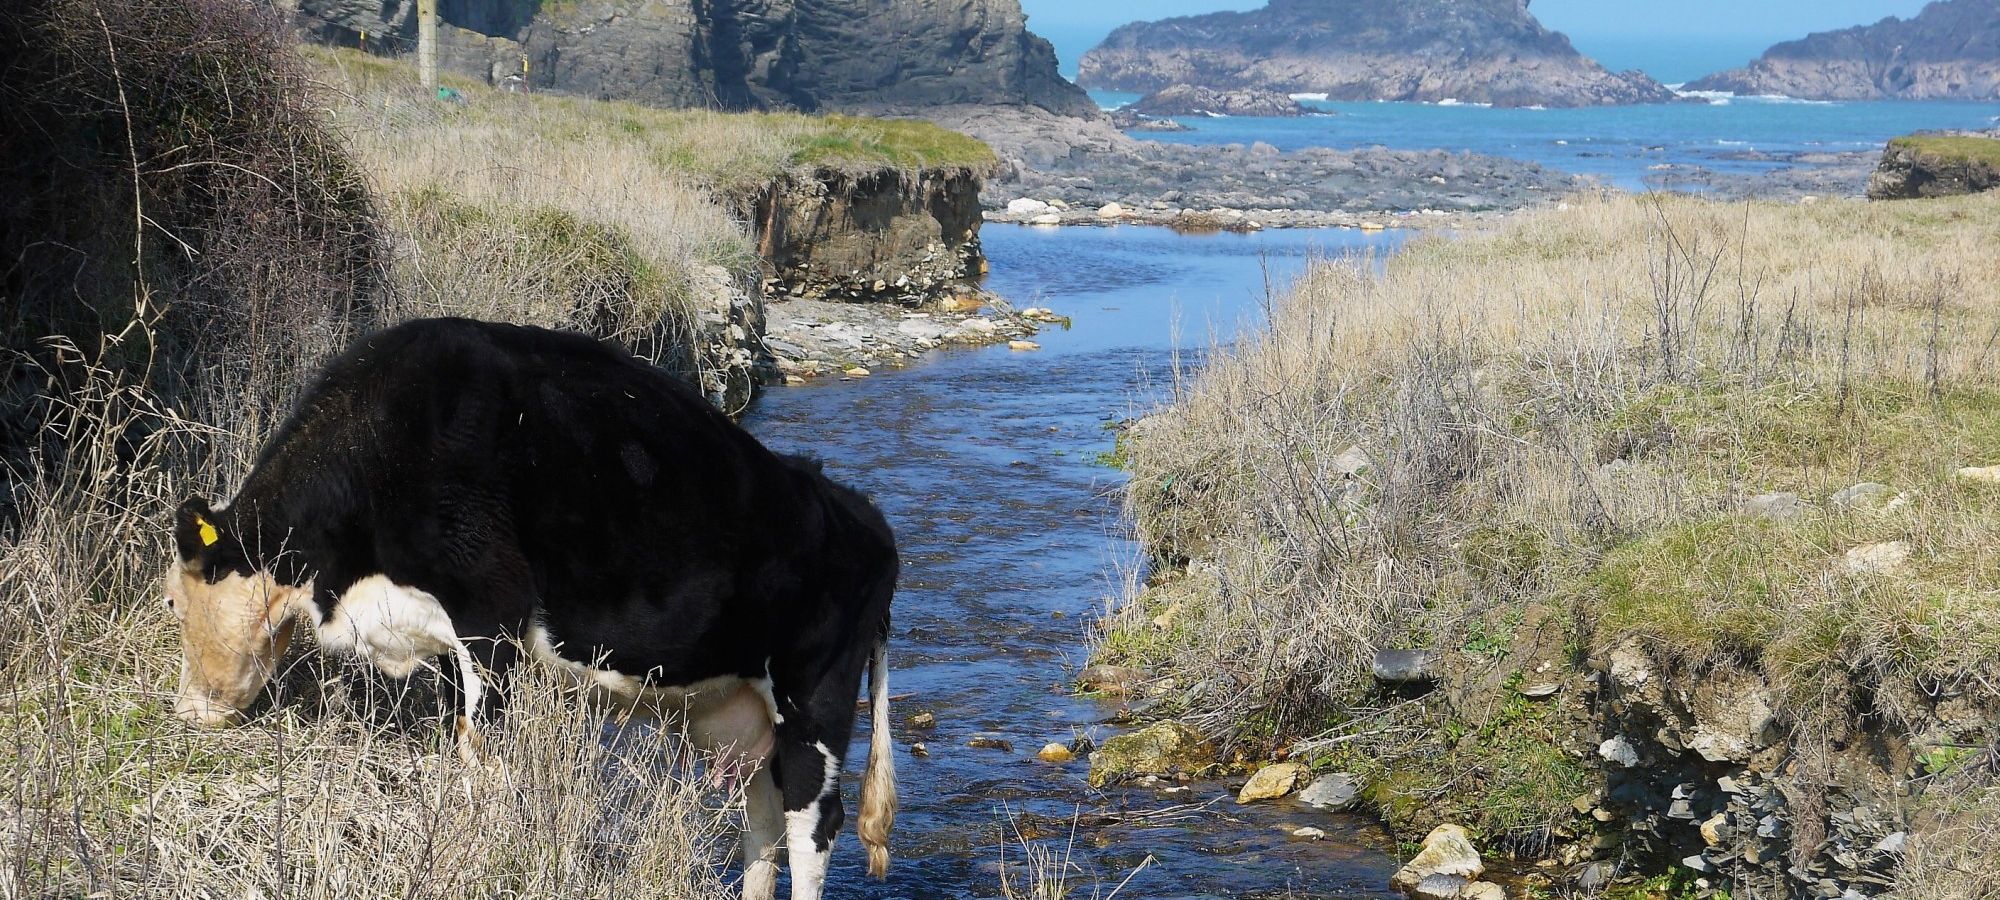 Cattle in the stream at Porthcothan Bay